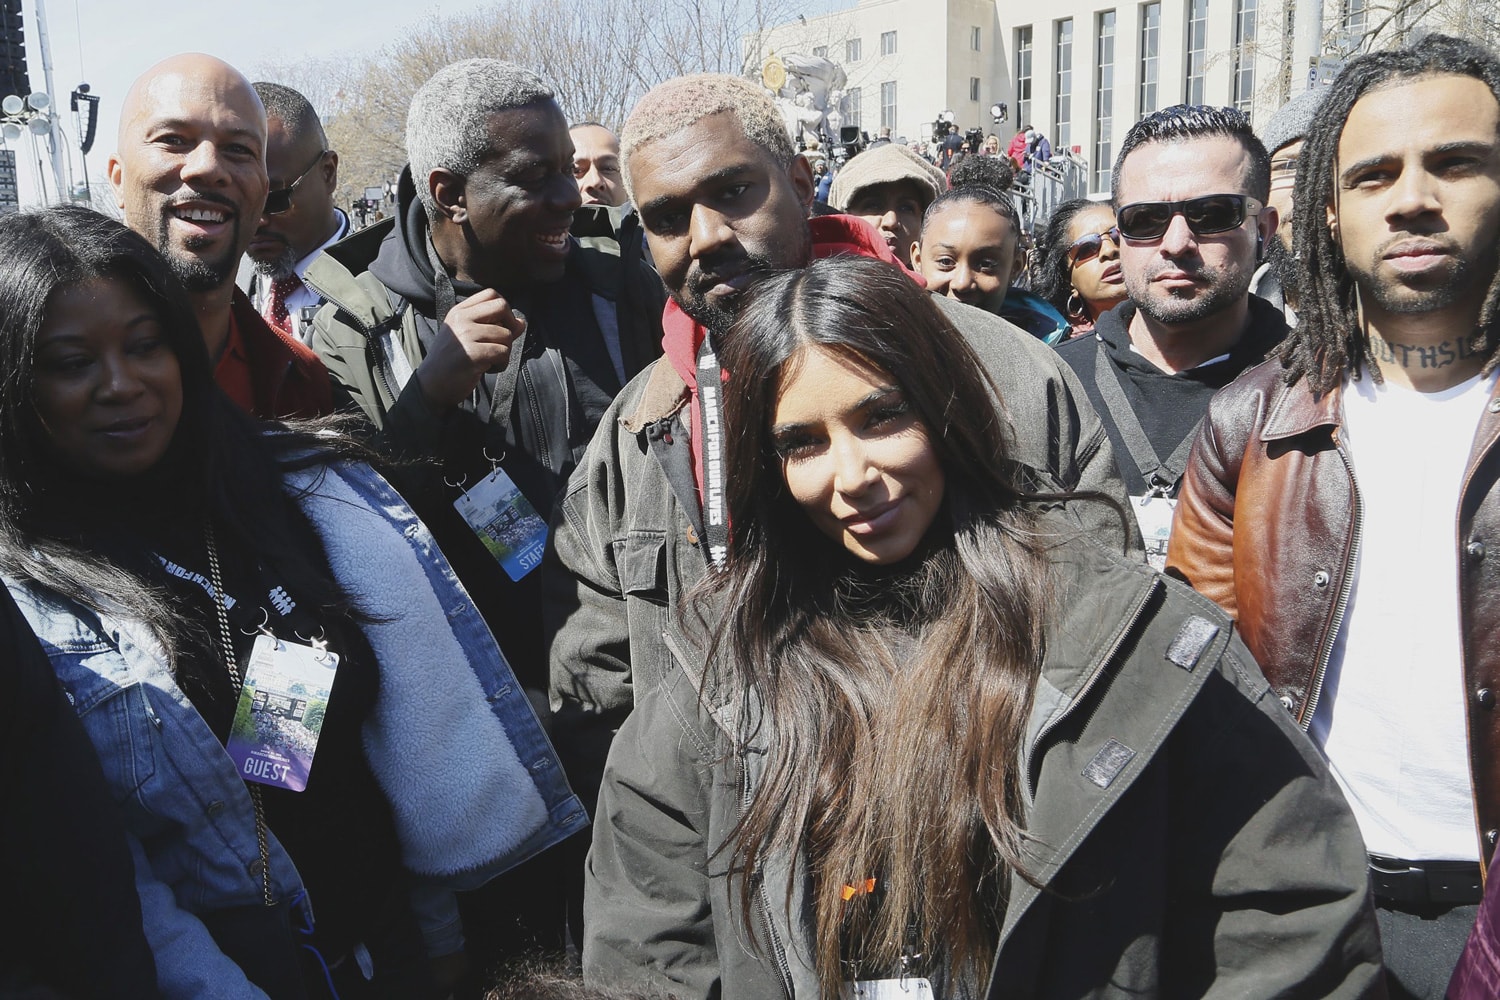 Kanye West Kim Kardashian North West March for Our Lives Protest event 24 2018 nra guns